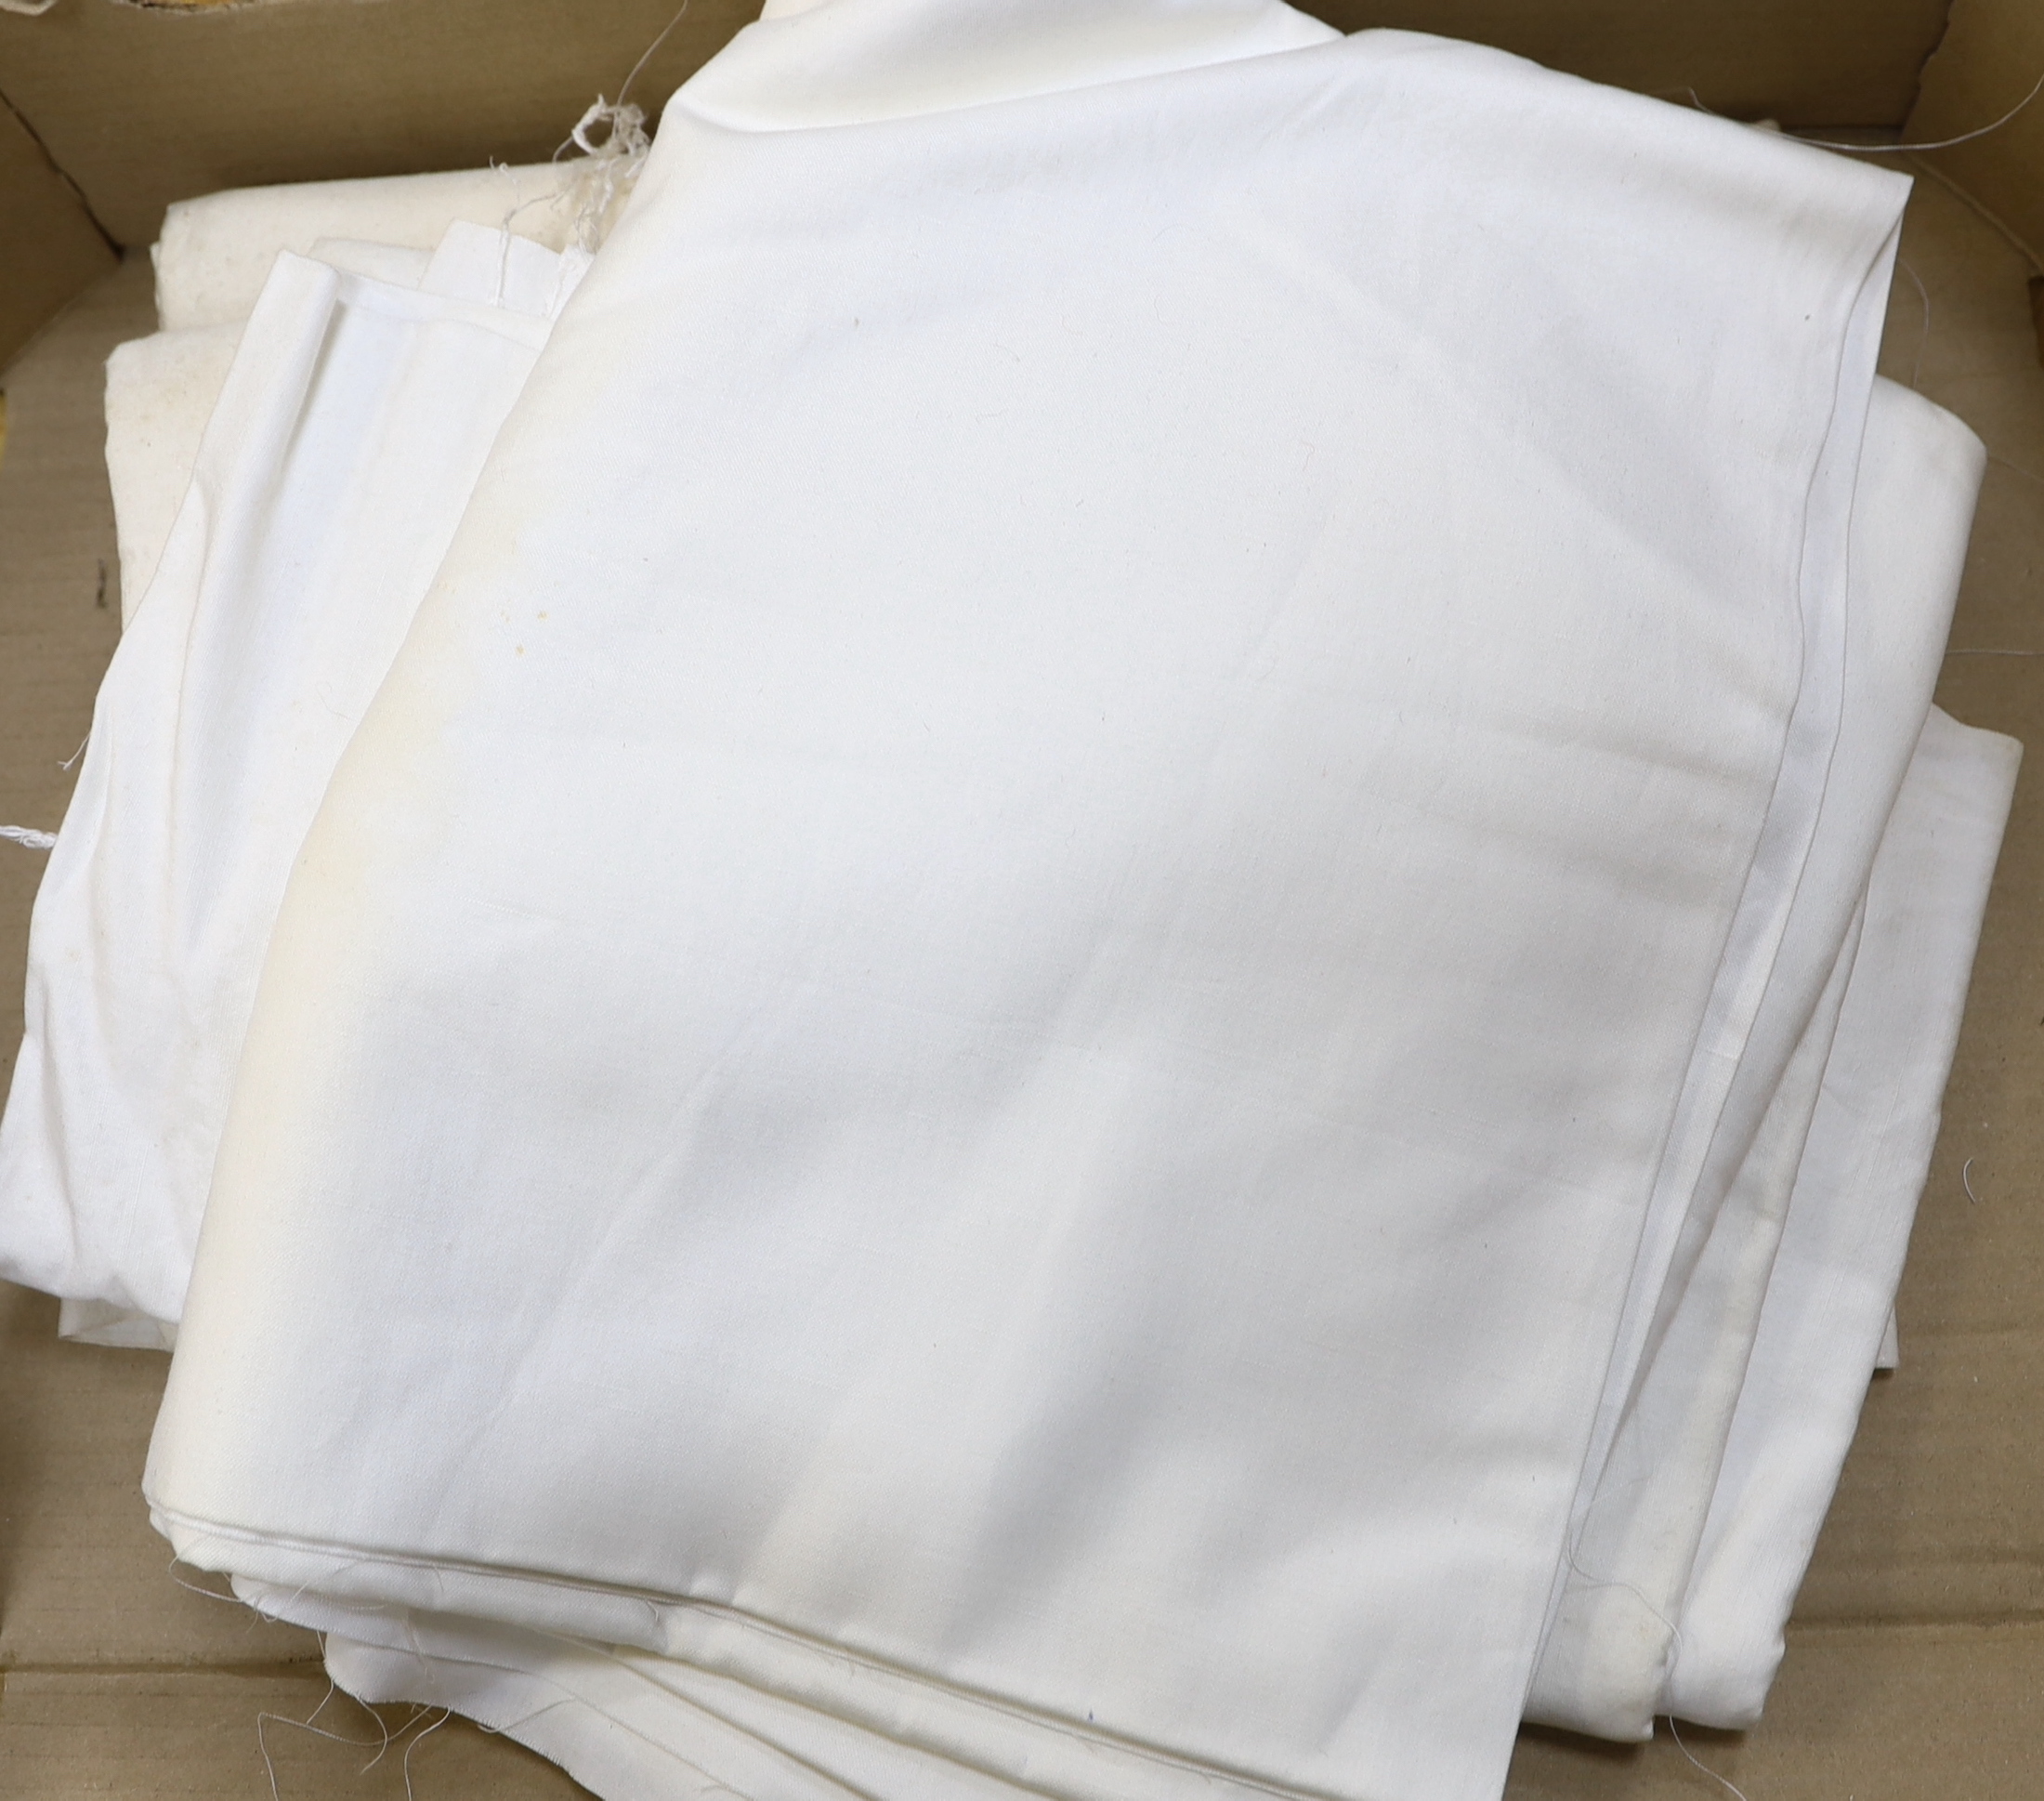 Various lengths of French linen sheeting